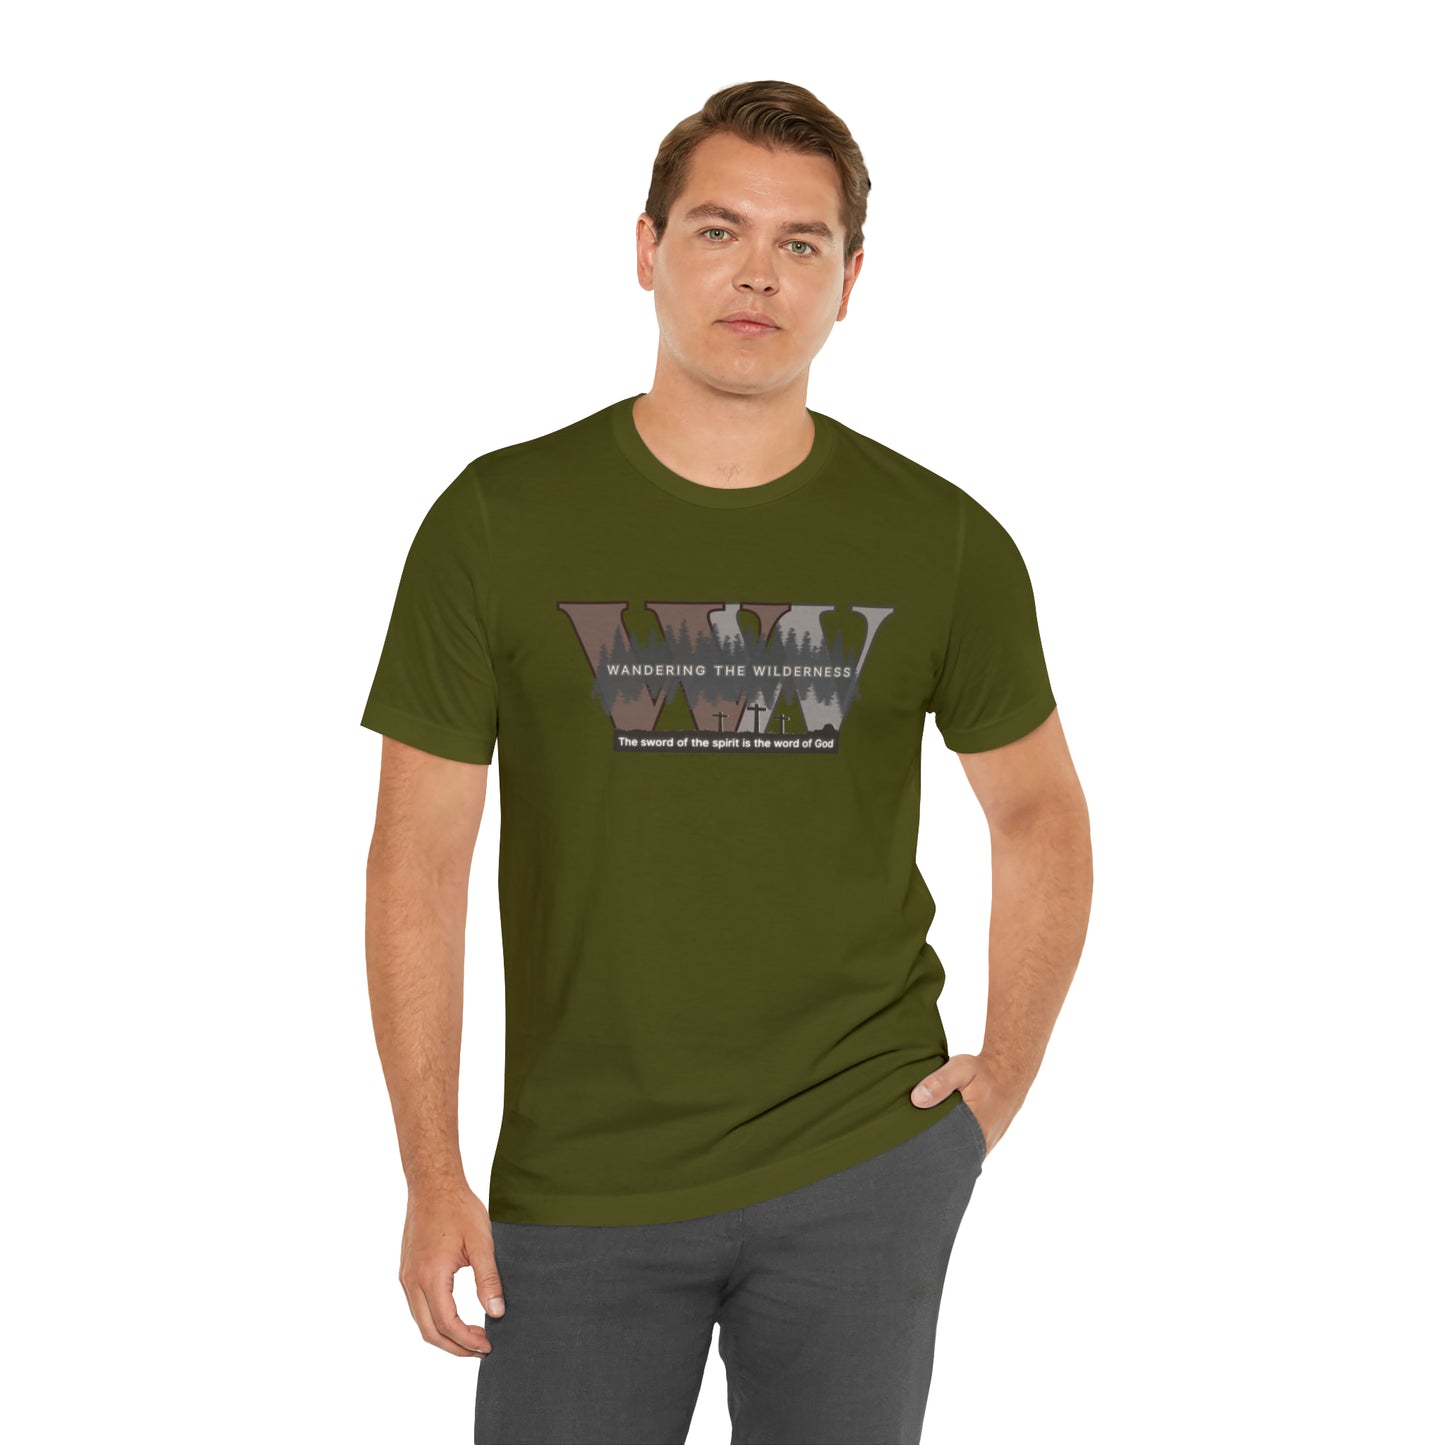 Wandering the Wilderness big logo athletic fit short sleeve t-shirt.